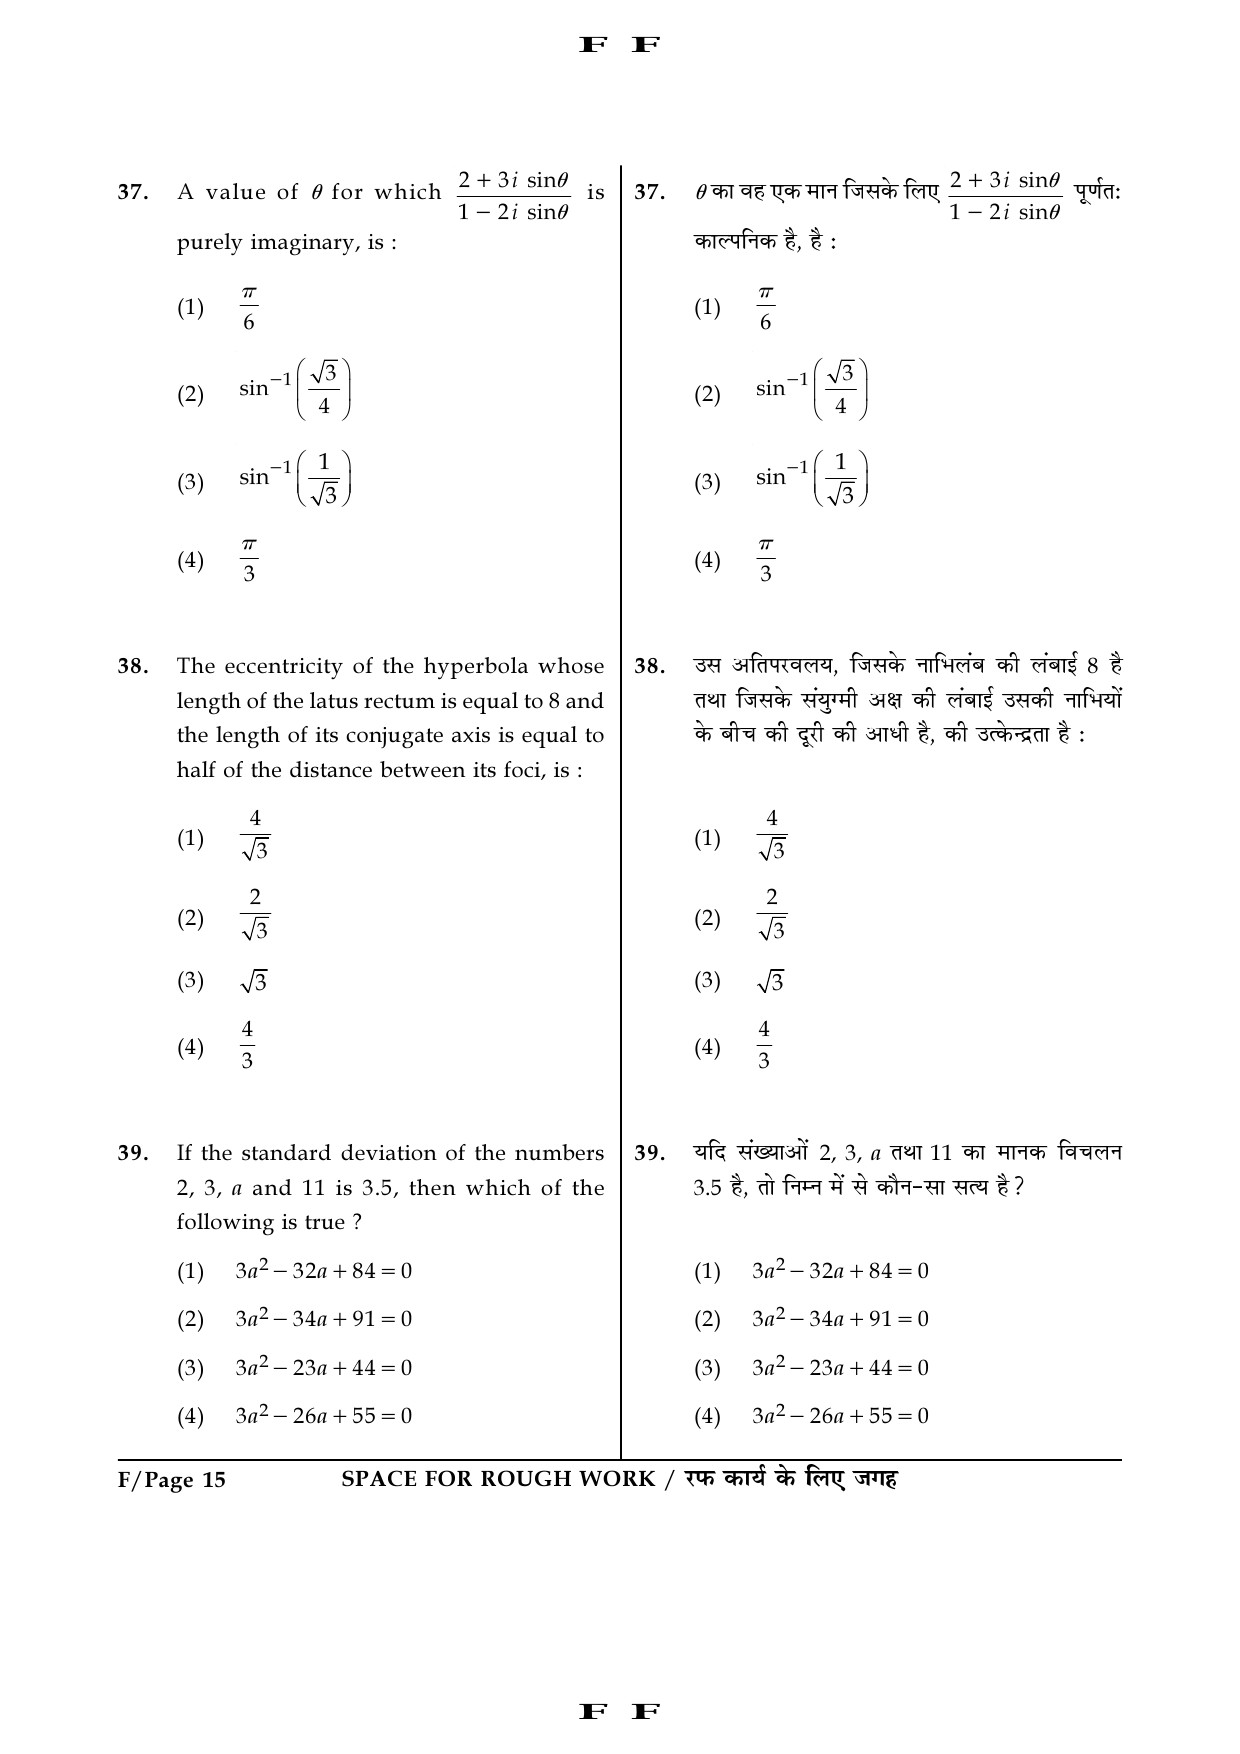 JEE Main Exam Question Paper 2016 Booklet F 15